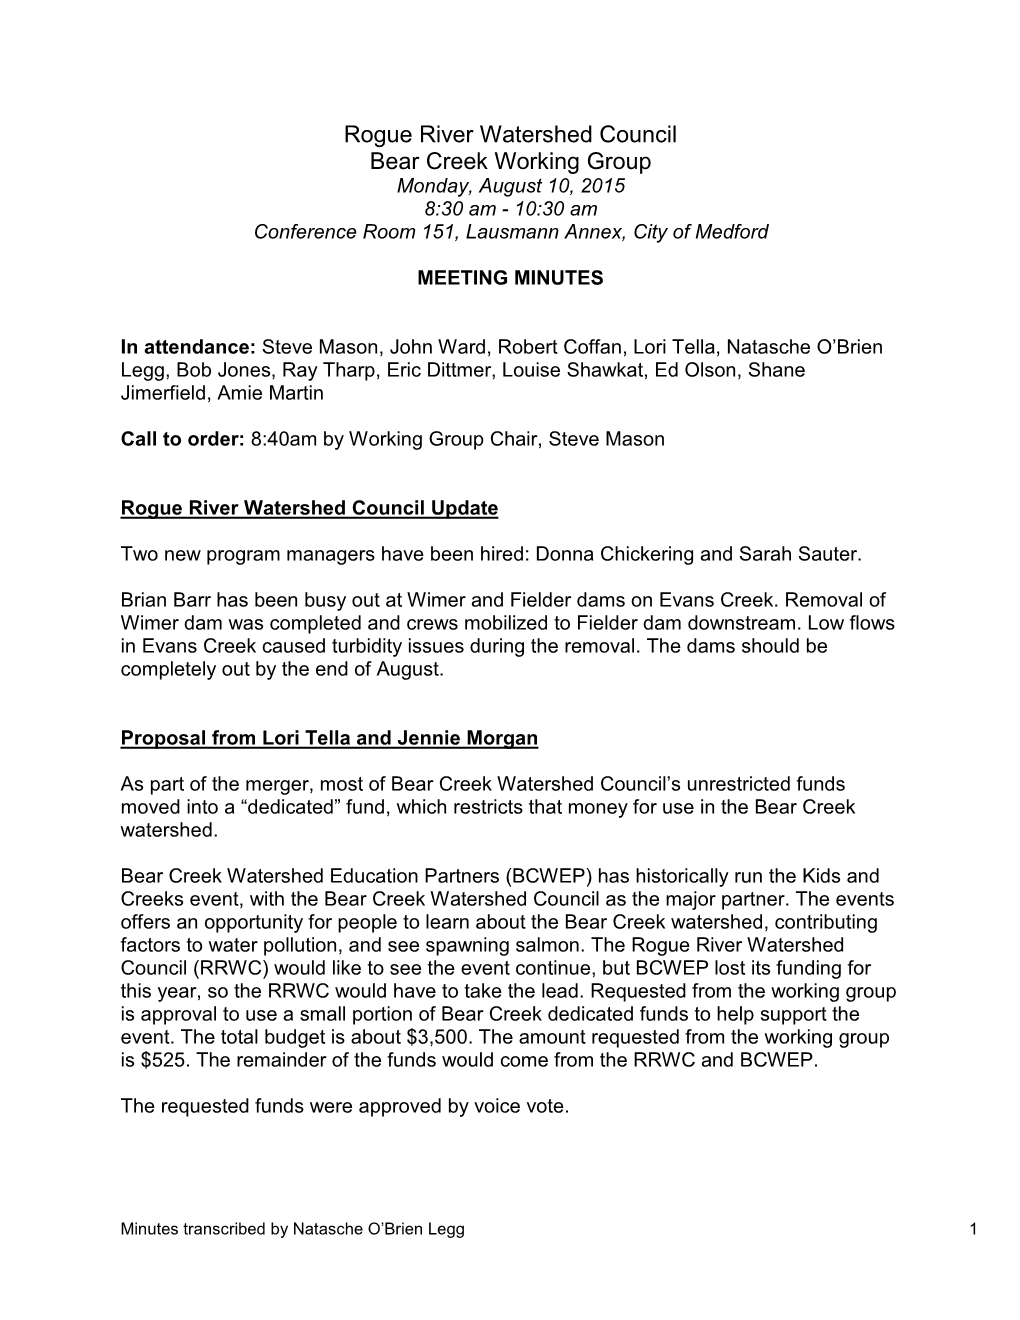 Rogue River Watershed Council Bear Creek Working Group Monday, August 10, 2015 8:30 Am - 10:30 Am Conference Room 151, Lausmann Annex, City of Medford